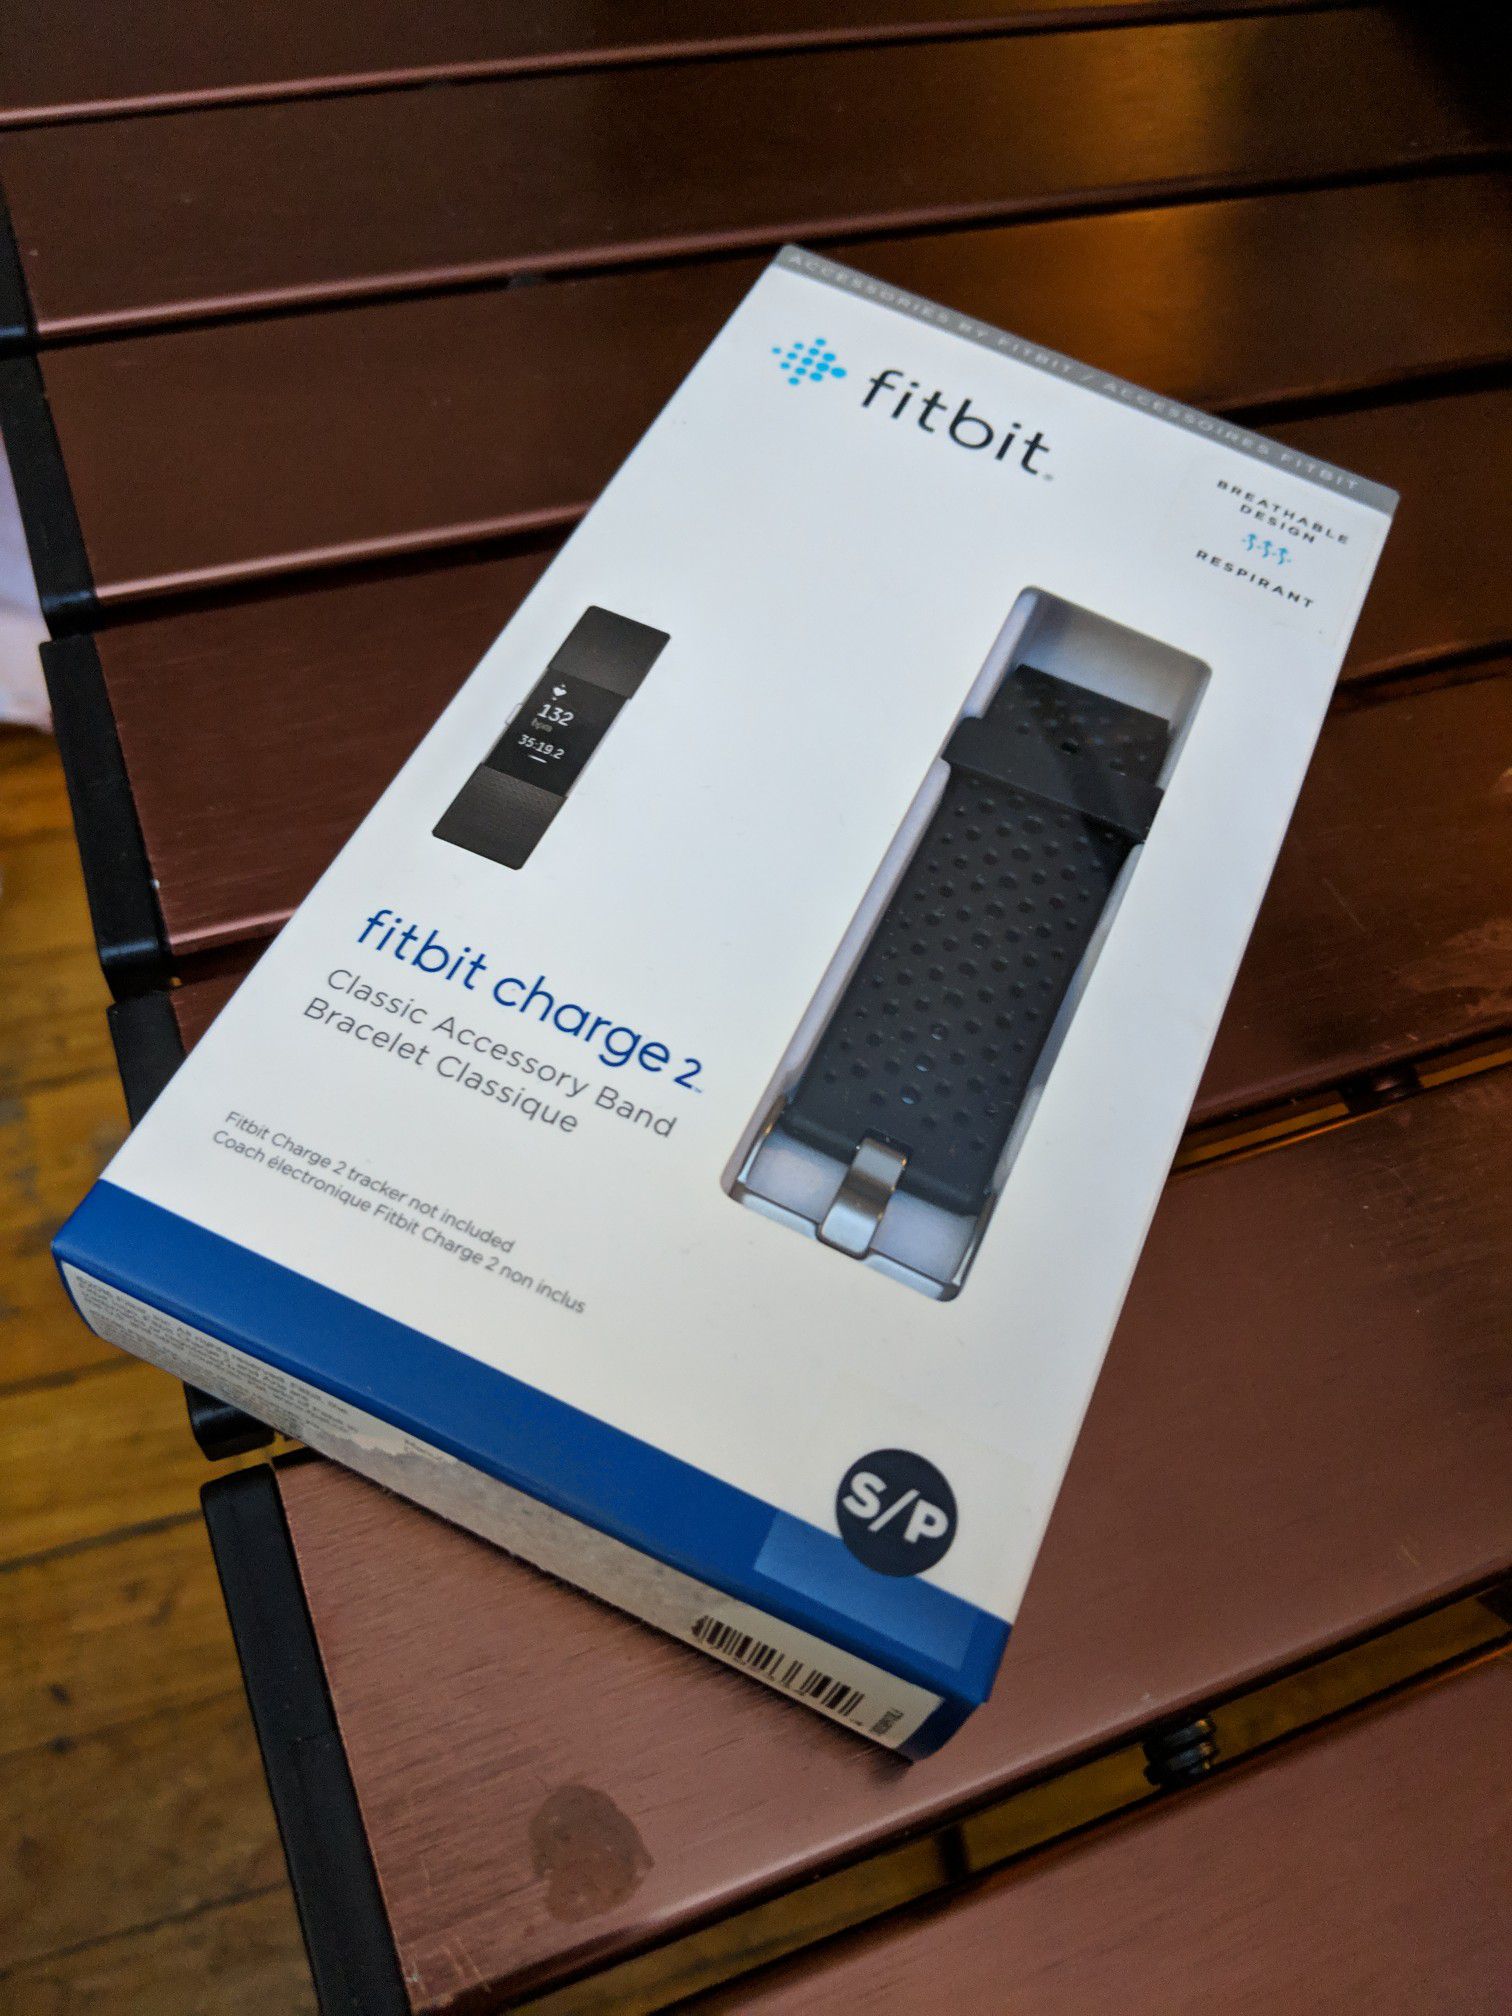 Fitbit Charge 2 Sports Band